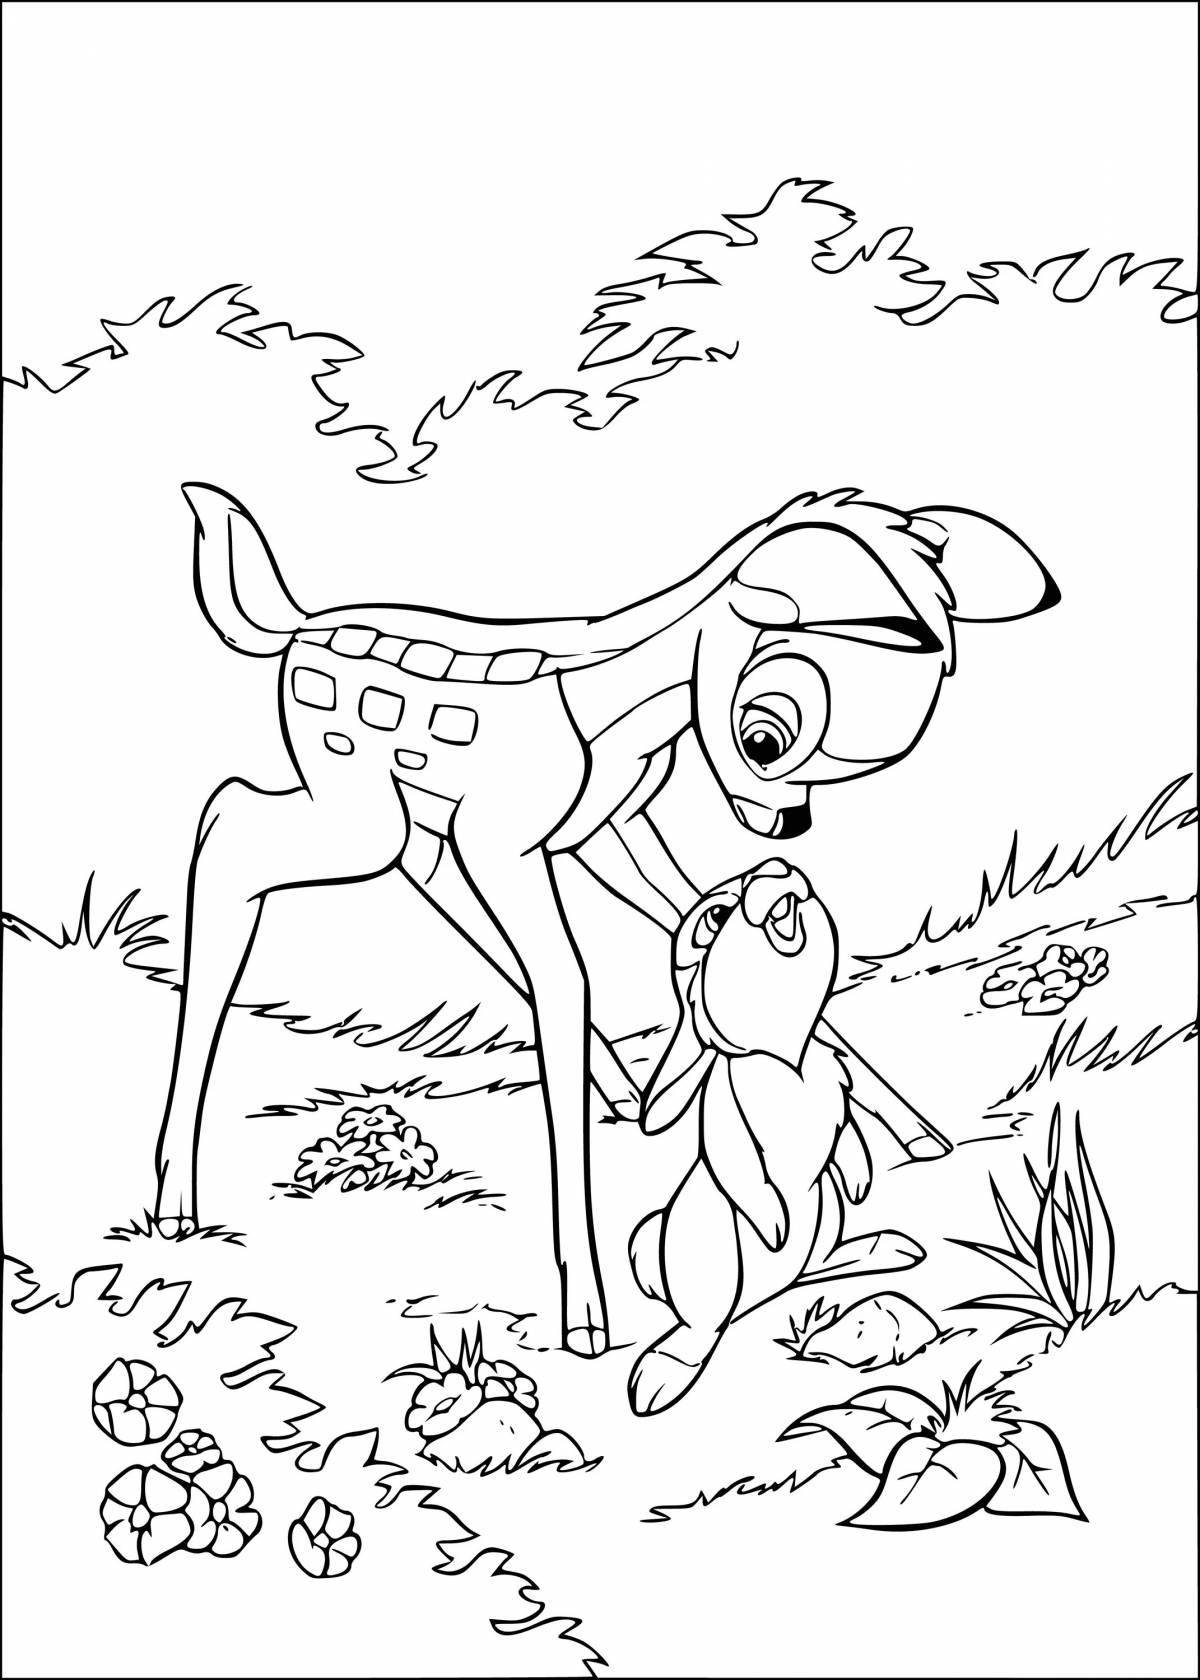 Magic bambi coloring book for kids 3-4 years old